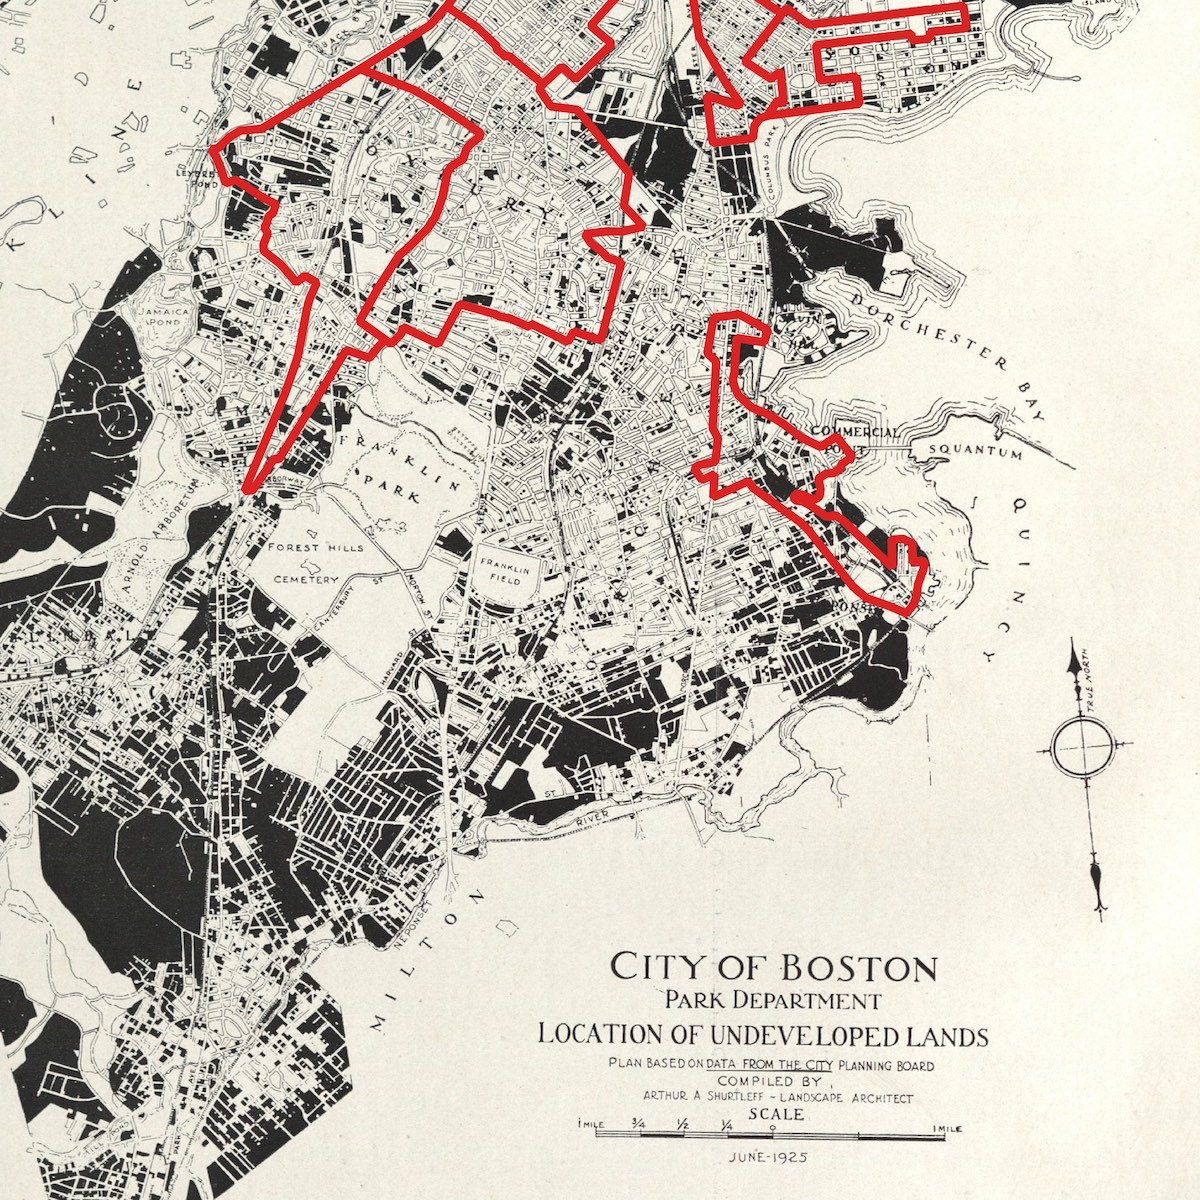 Image of _Location of Undeveloped Lands_ with boundaries from _Residential Security Map of Boston, Mass._